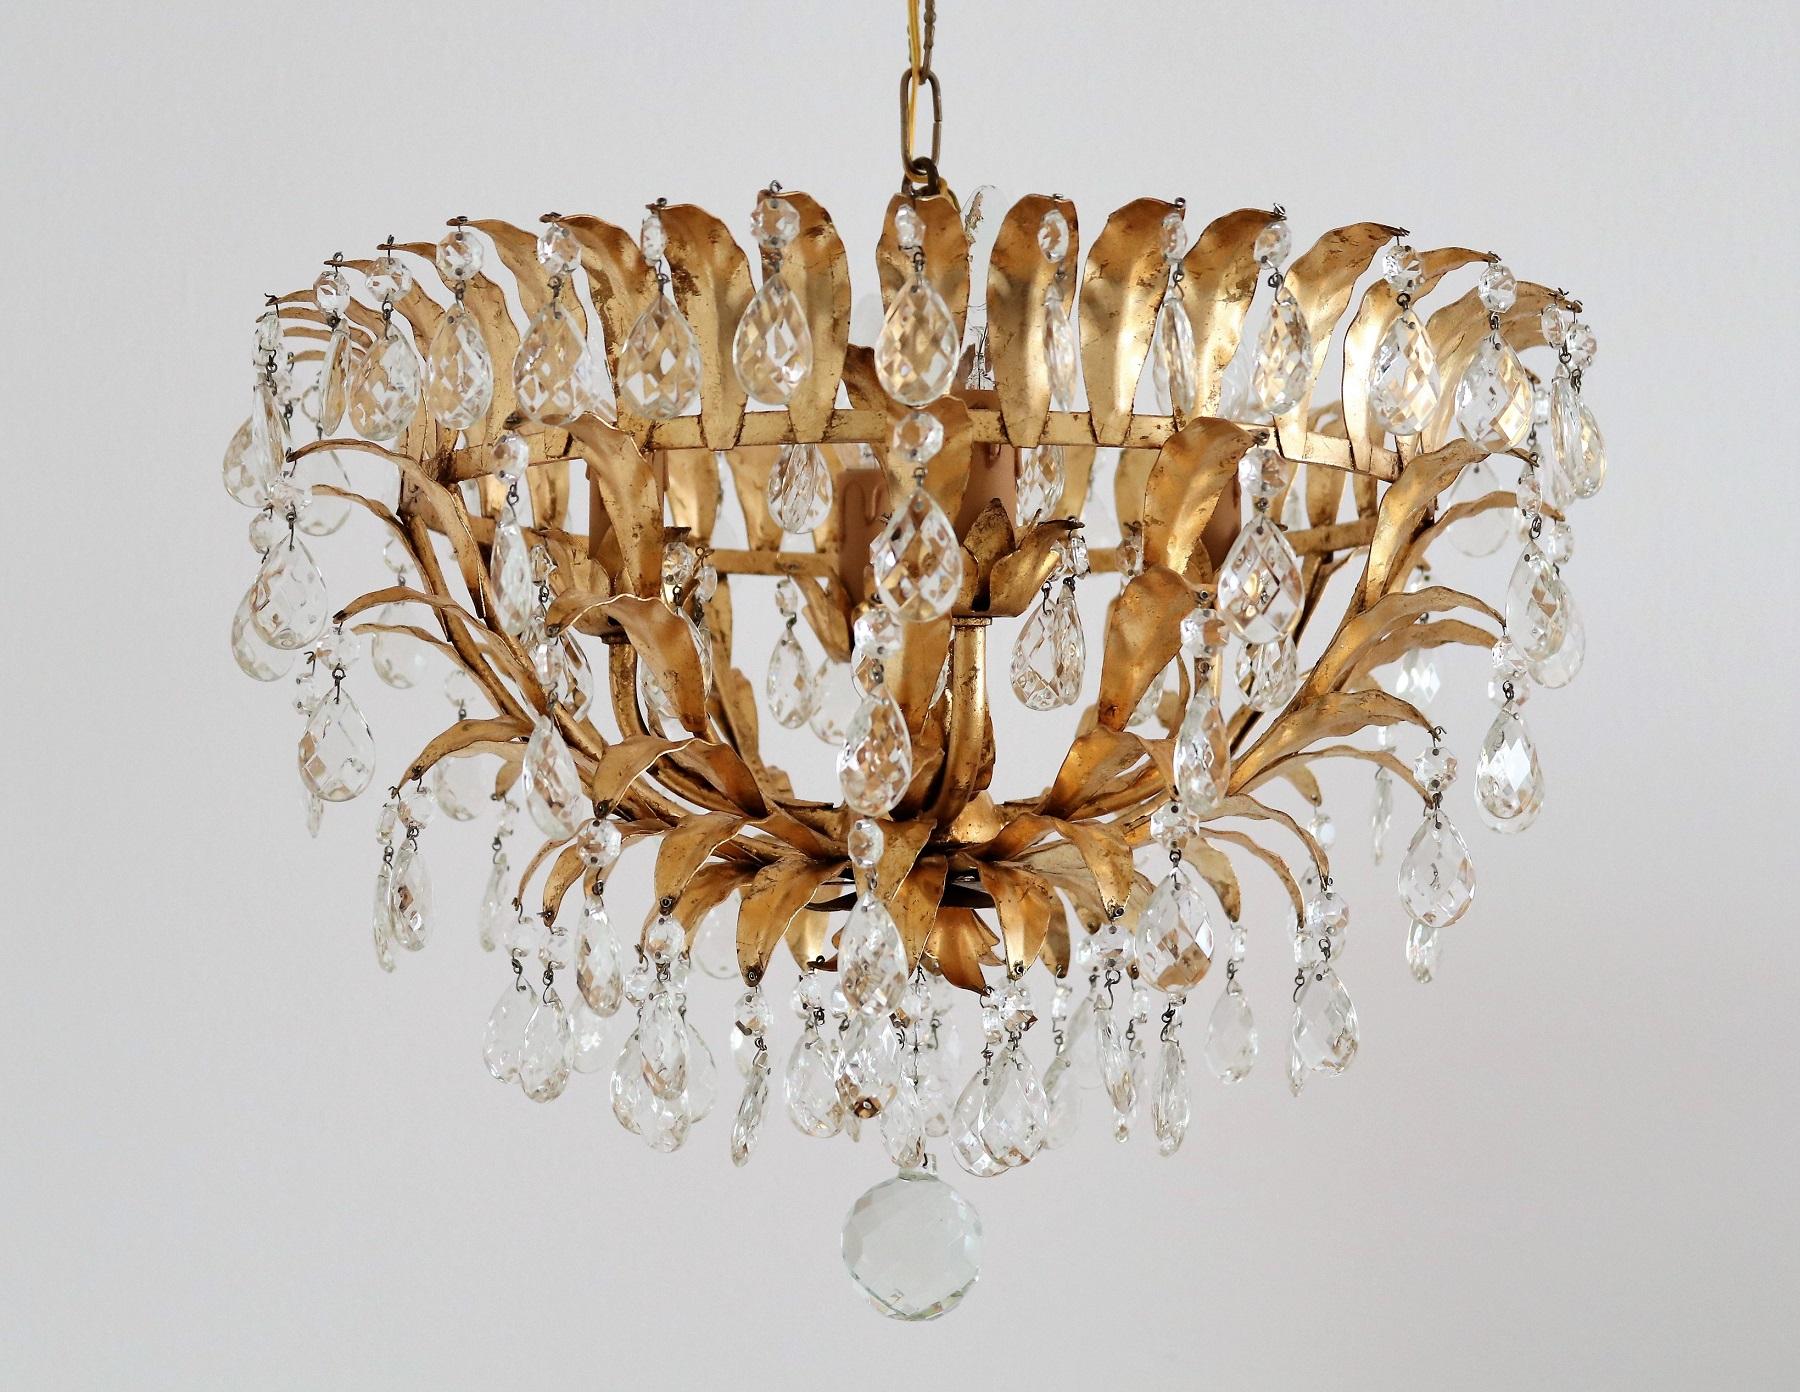 Metal Italian Midcentury Gilt Crystal Flush Mount Chandelier with Leafes by Banci 